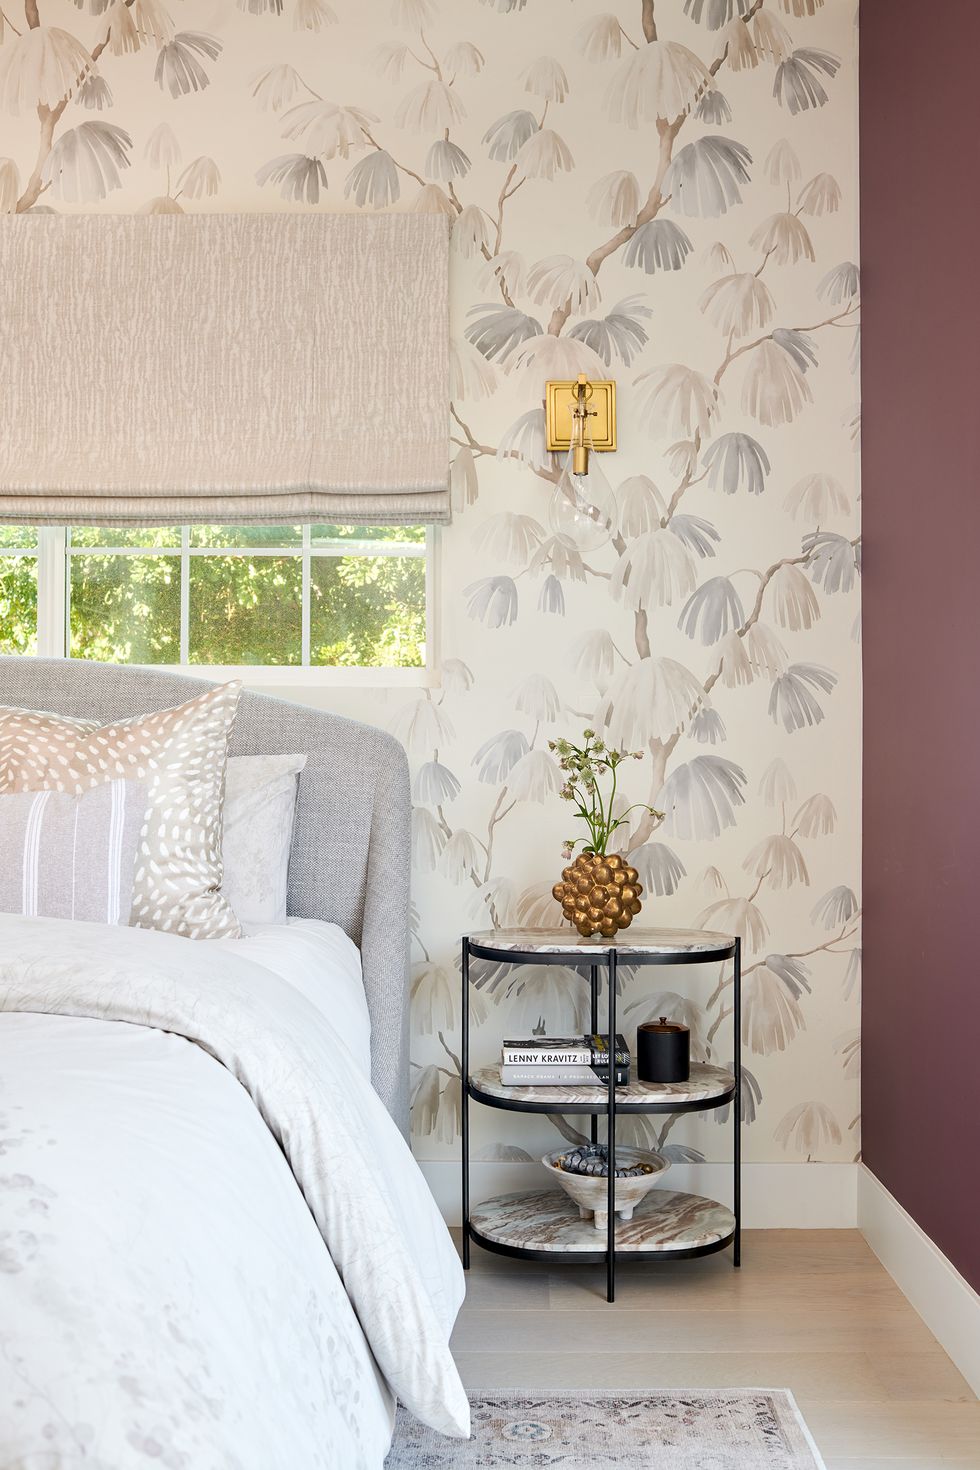 The Proper Approach to Pull off a Bed room Accent Wall